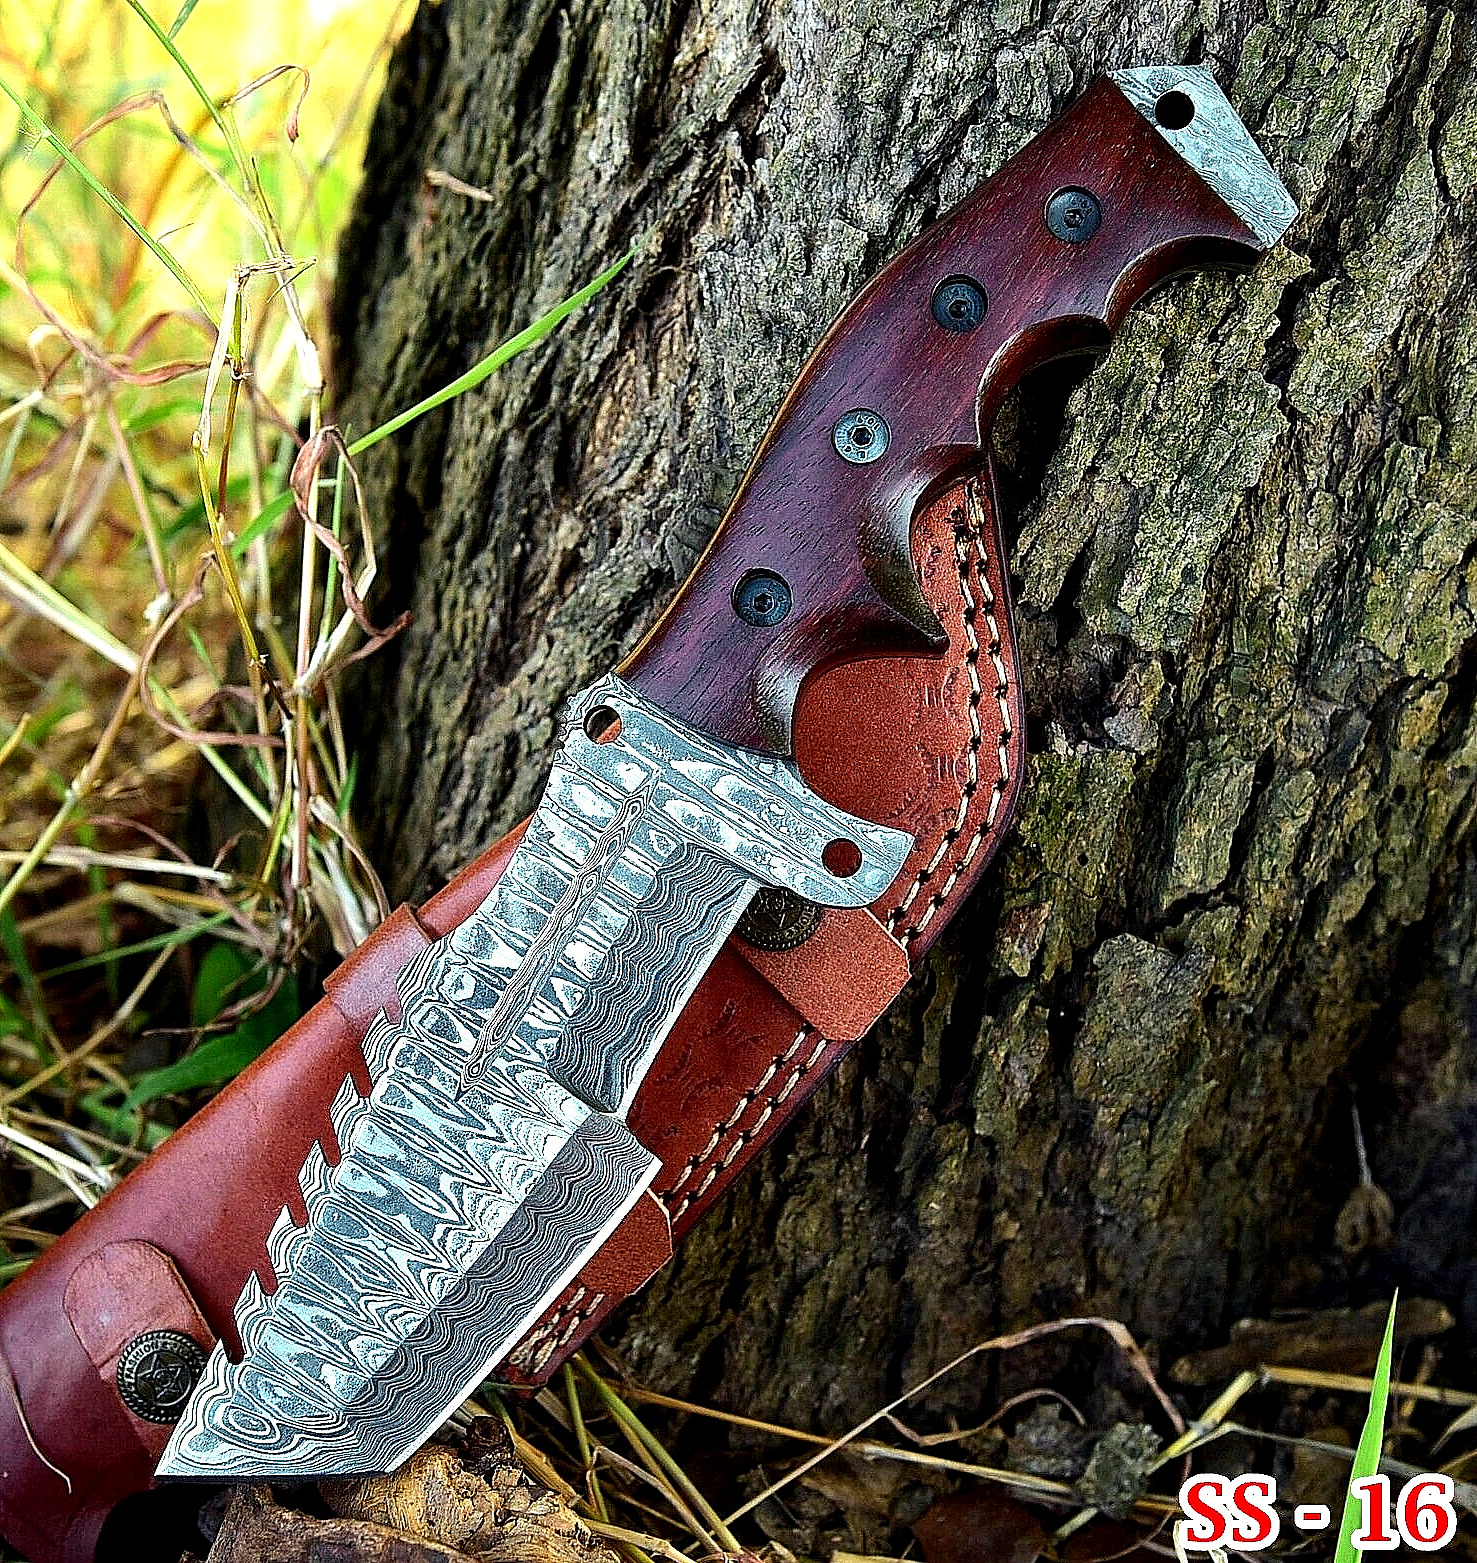 HANDMADE FORGED DAMASCUS STEEL TRACKER HUNTING KNIFE SURVIVAL CAMPING EDC SS-16